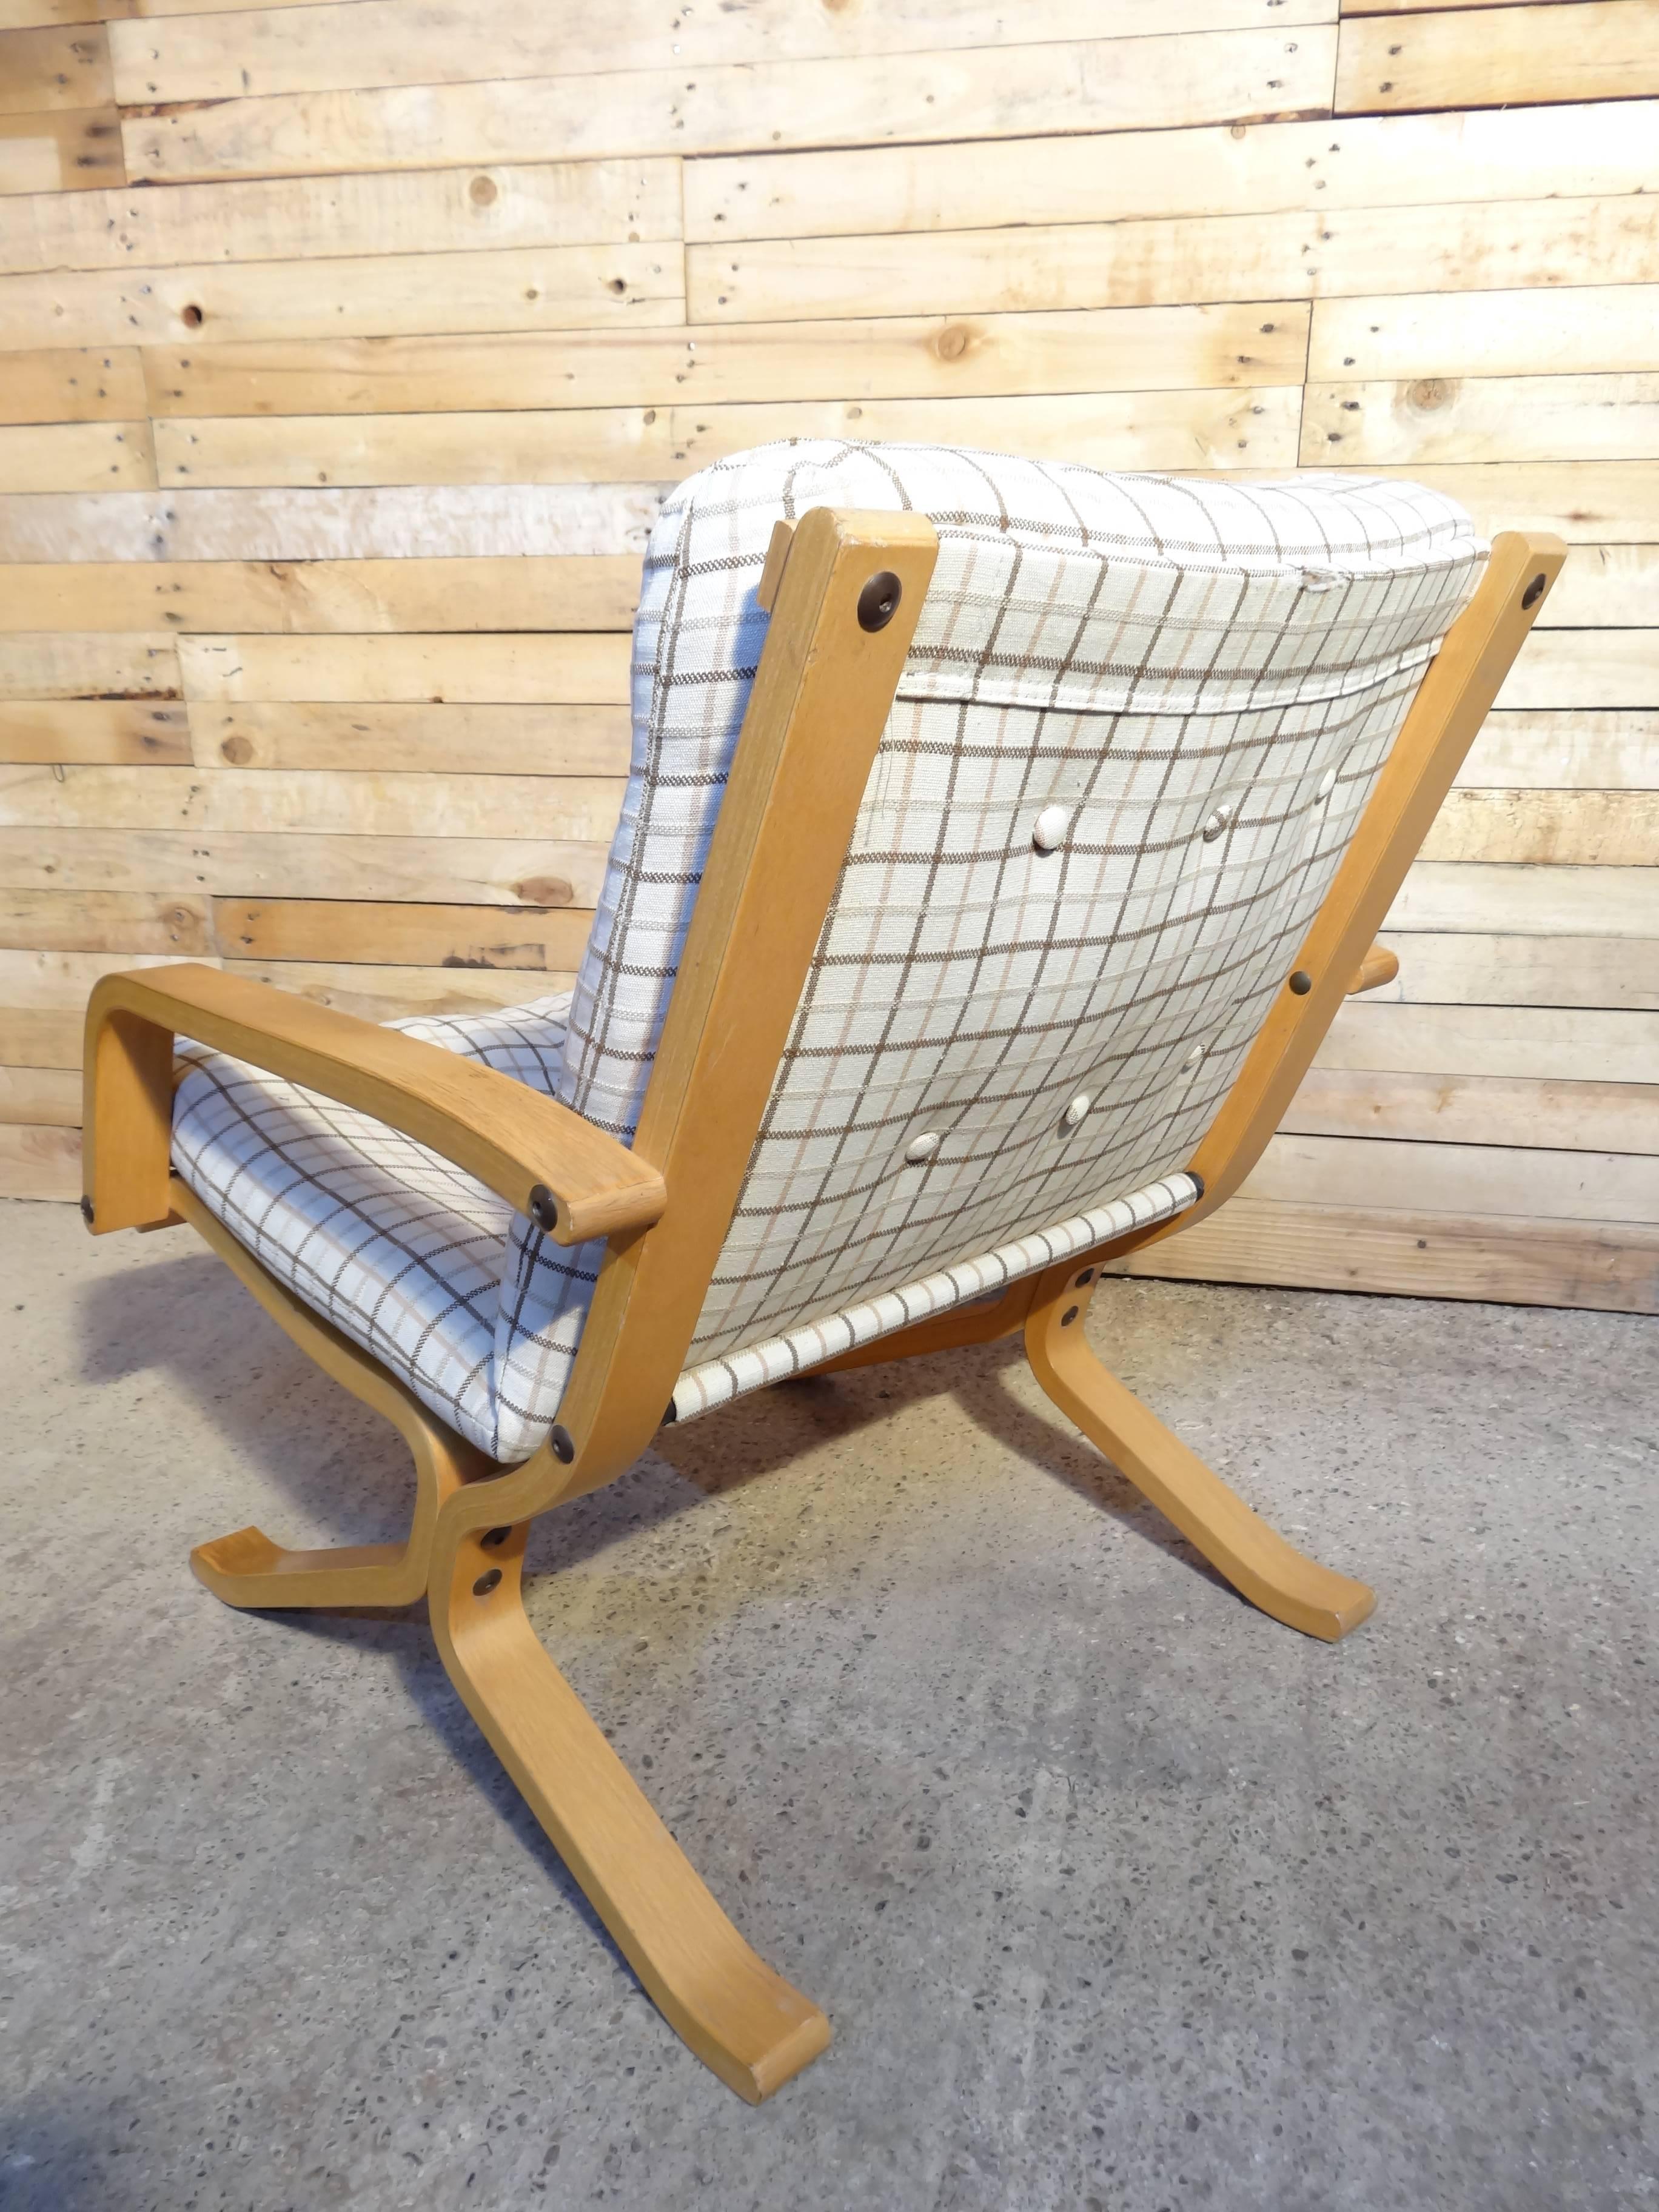 1960 retro vintage original Scandinavian Ingmar Relling designed bentwood unusual lightwood siesta chair covered in a lovely retro light fabric.

This chair is very unusual and sought after we have not seen any for sale until now, grab yourself a